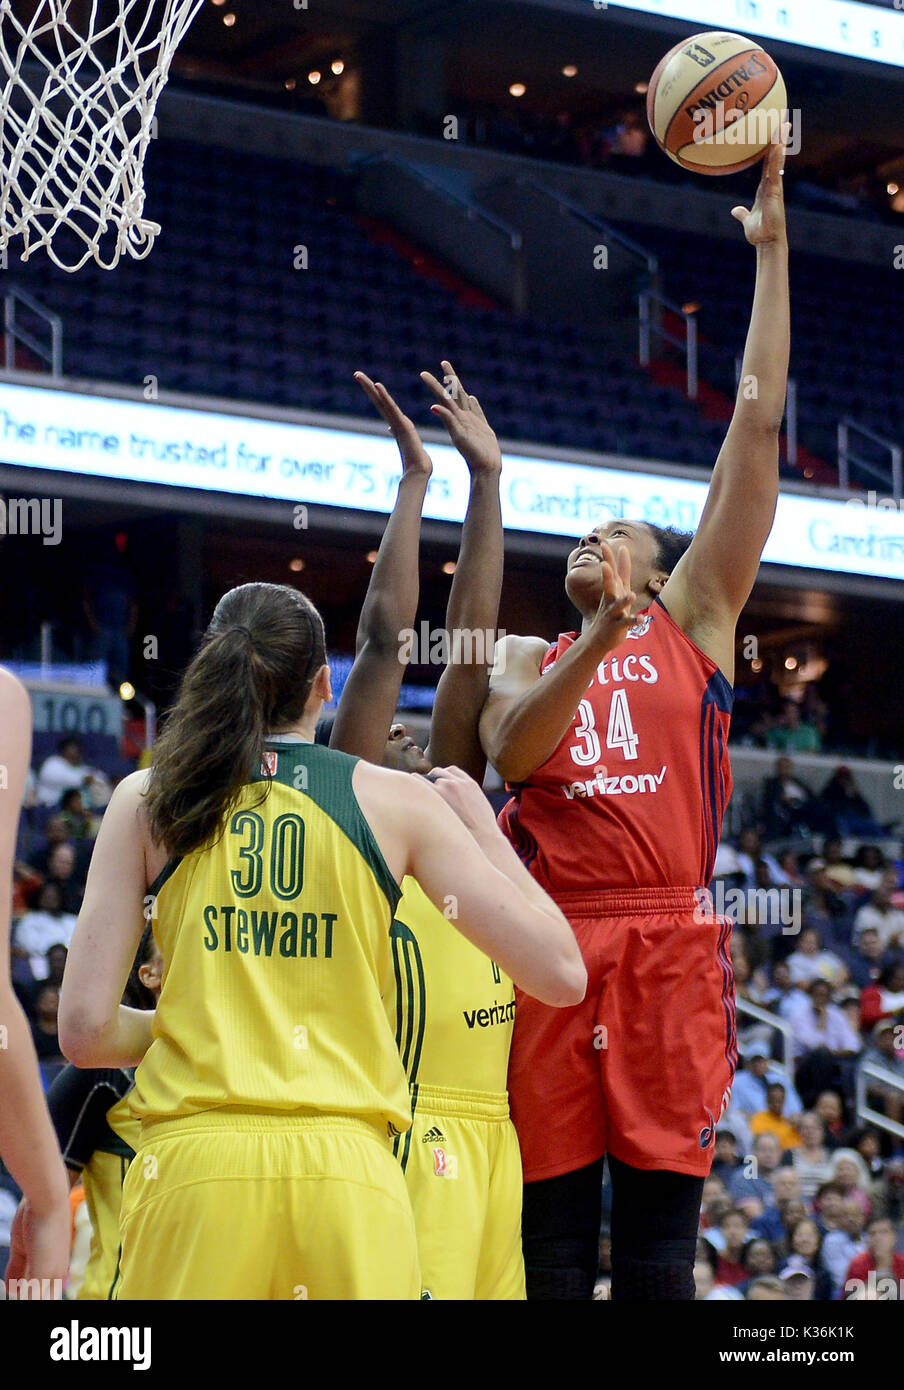 Washington, DC, USA. 1st Sep, 2017. 20170901 - Washington Mystics center KRYSTAL THOMAS (34) scores on a hook shot over Seattle Storm forward CRYSTAL LANGHORNE (1) and Seattle Storm guard SUE BIRD (10) in the first half at Capital One Arena in Washington. Credit: Chuck Myers/ZUMA Wire/Alamy Live News Stock Photo